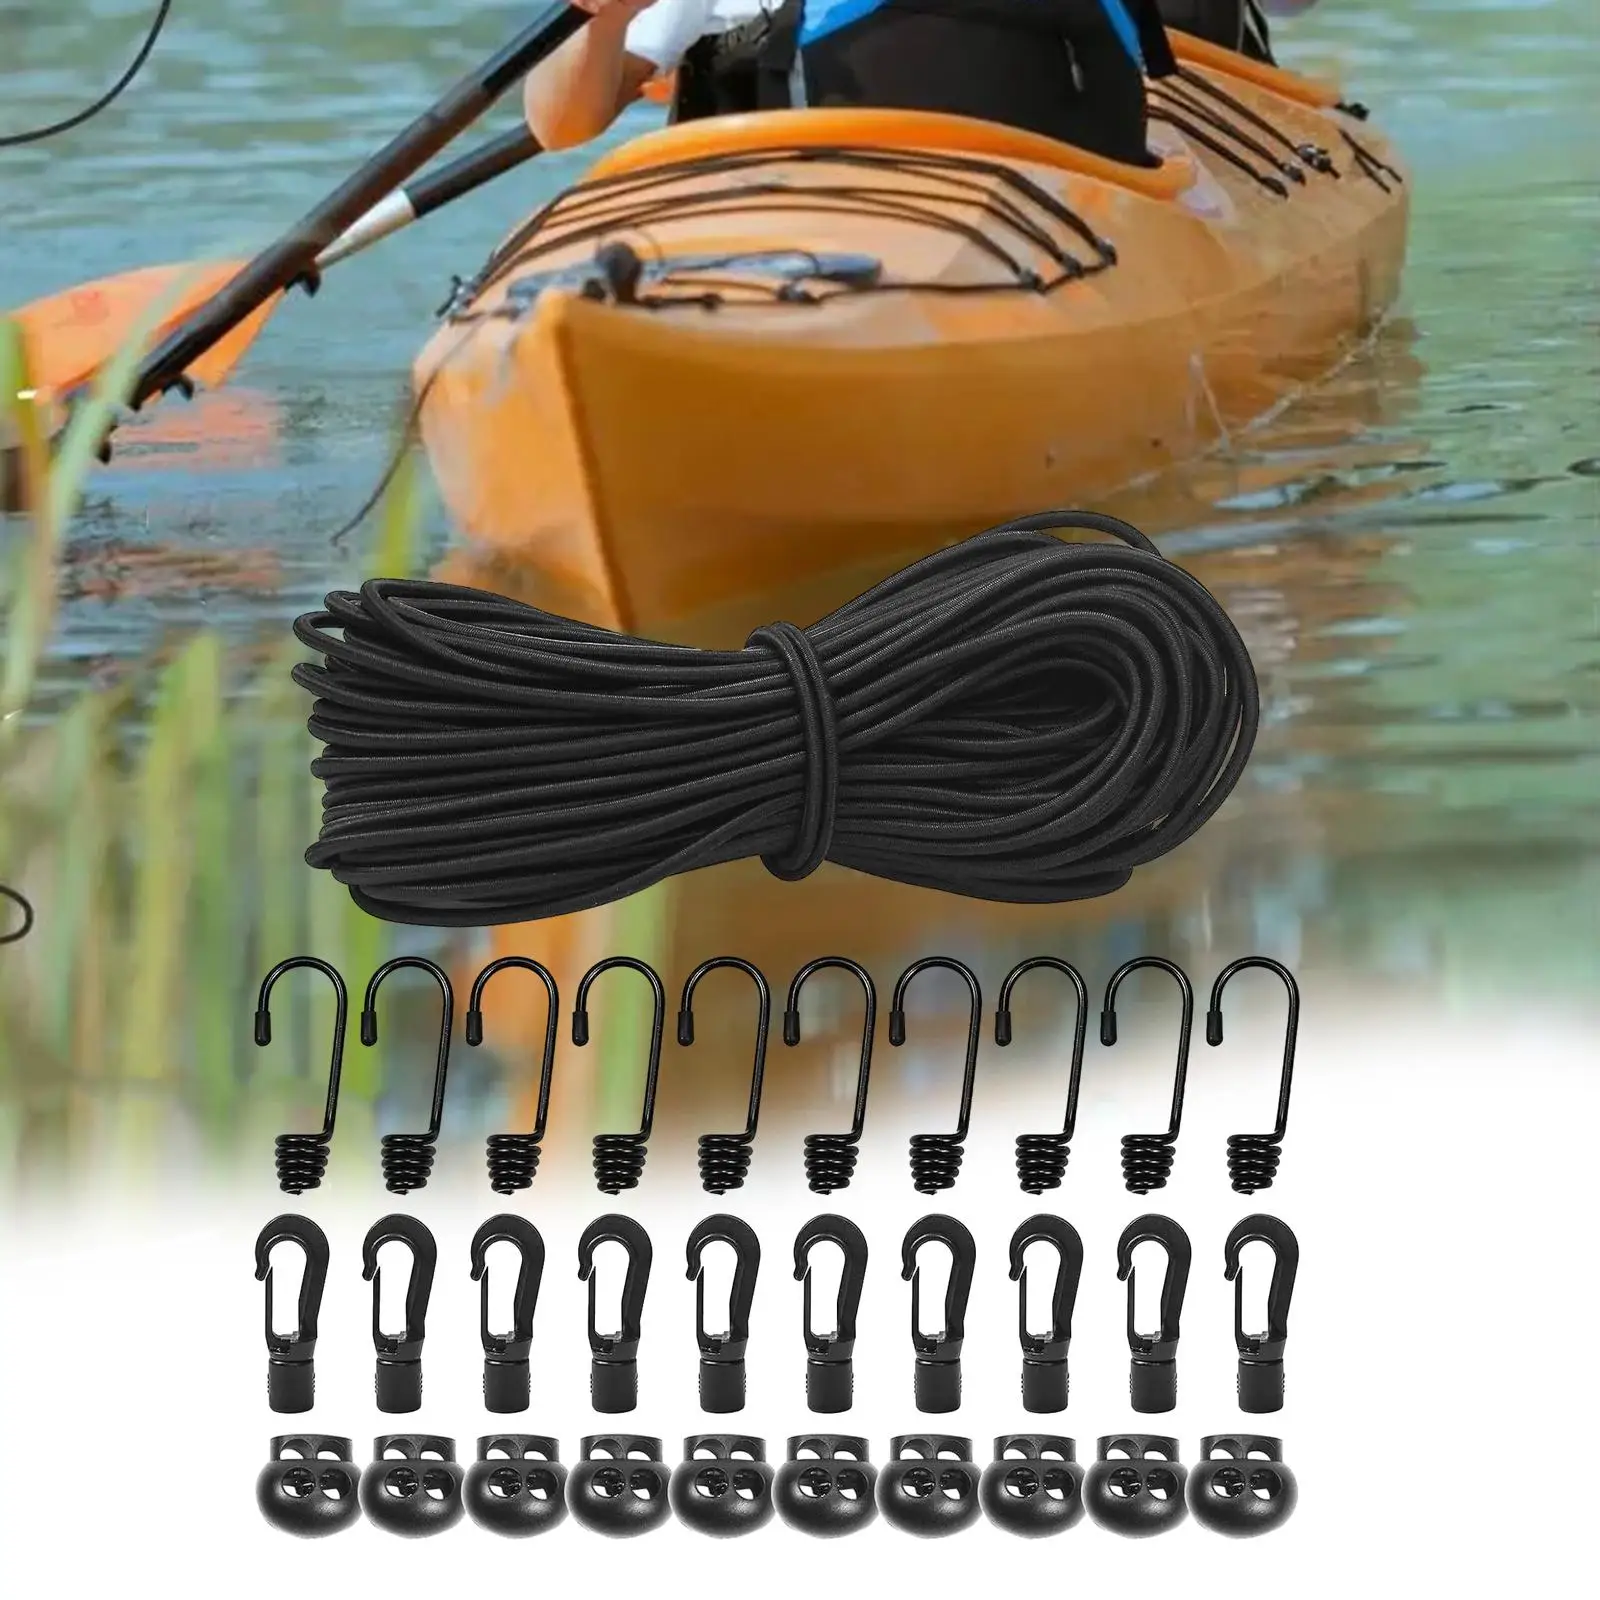 Elastic Bungee Shock Cord Canopy Tarp Cord 15M Length Kayak Bungee Kit for Outdoor Activities Water Sports Camping Boat